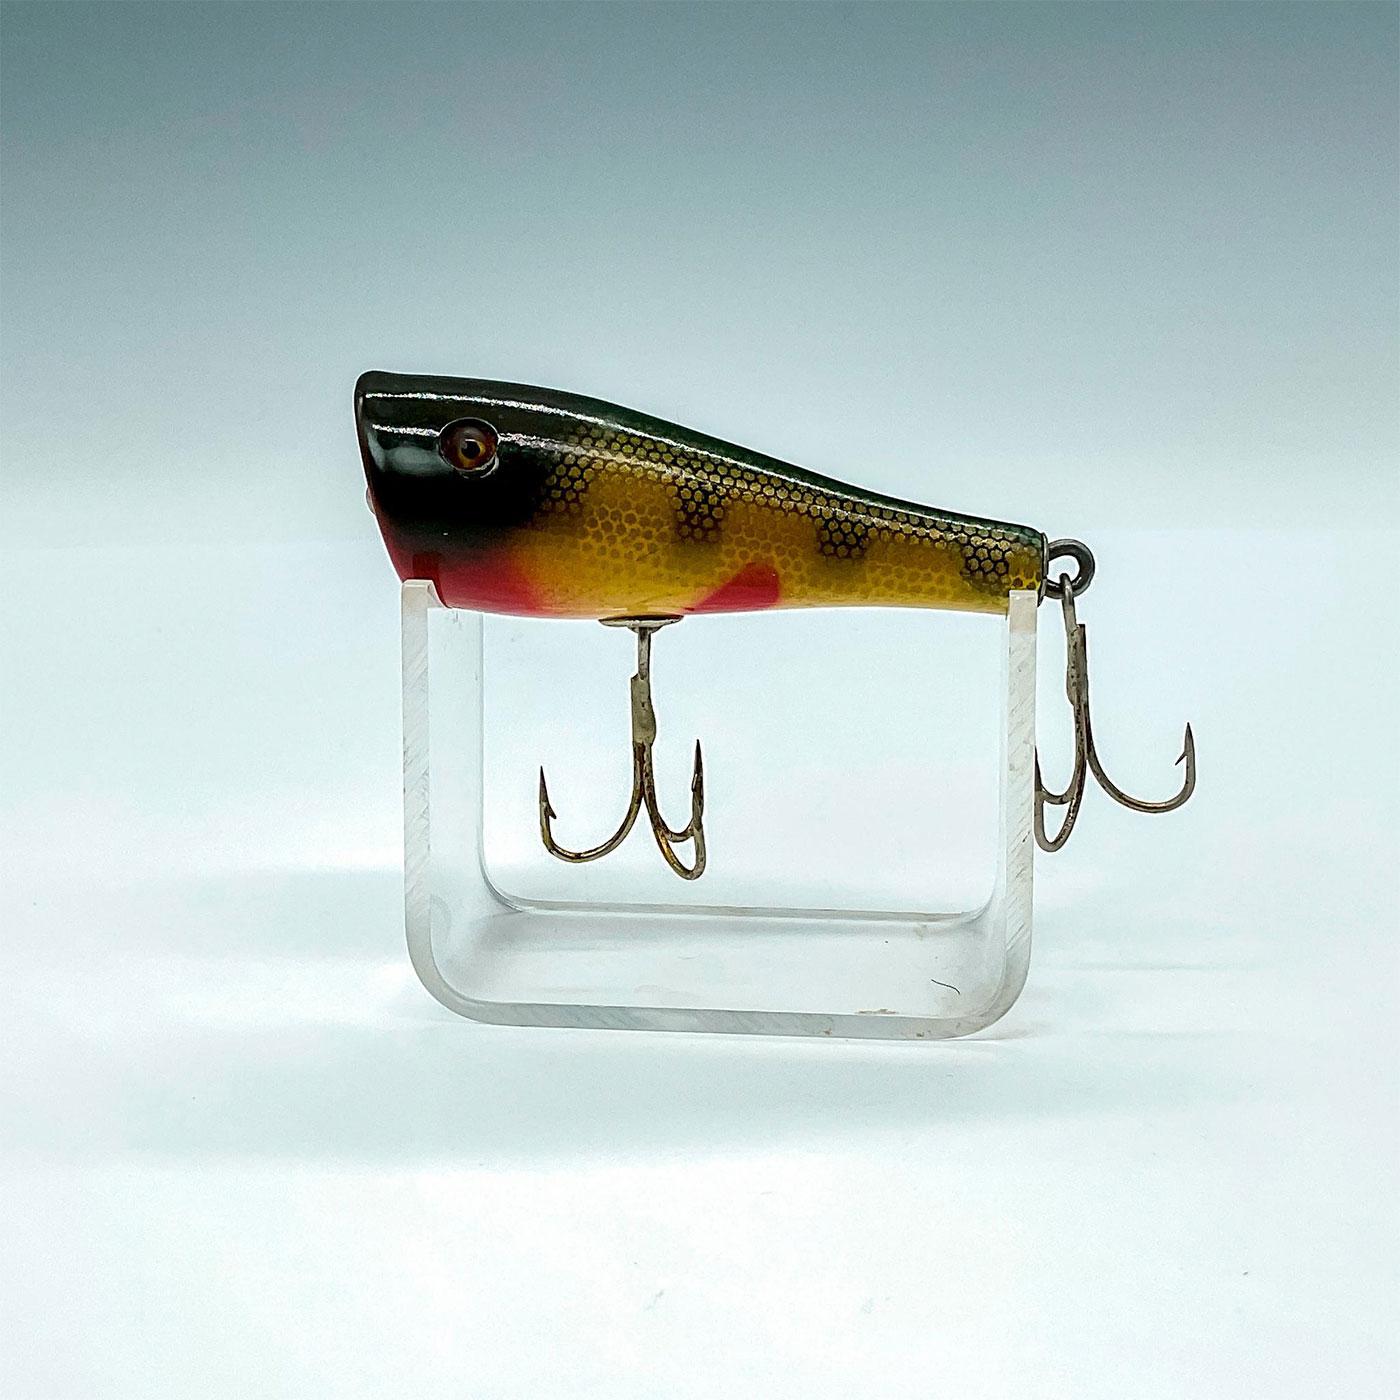 Sold at Auction: VINTAGE CREEK CHUB LURES FISHING LURE